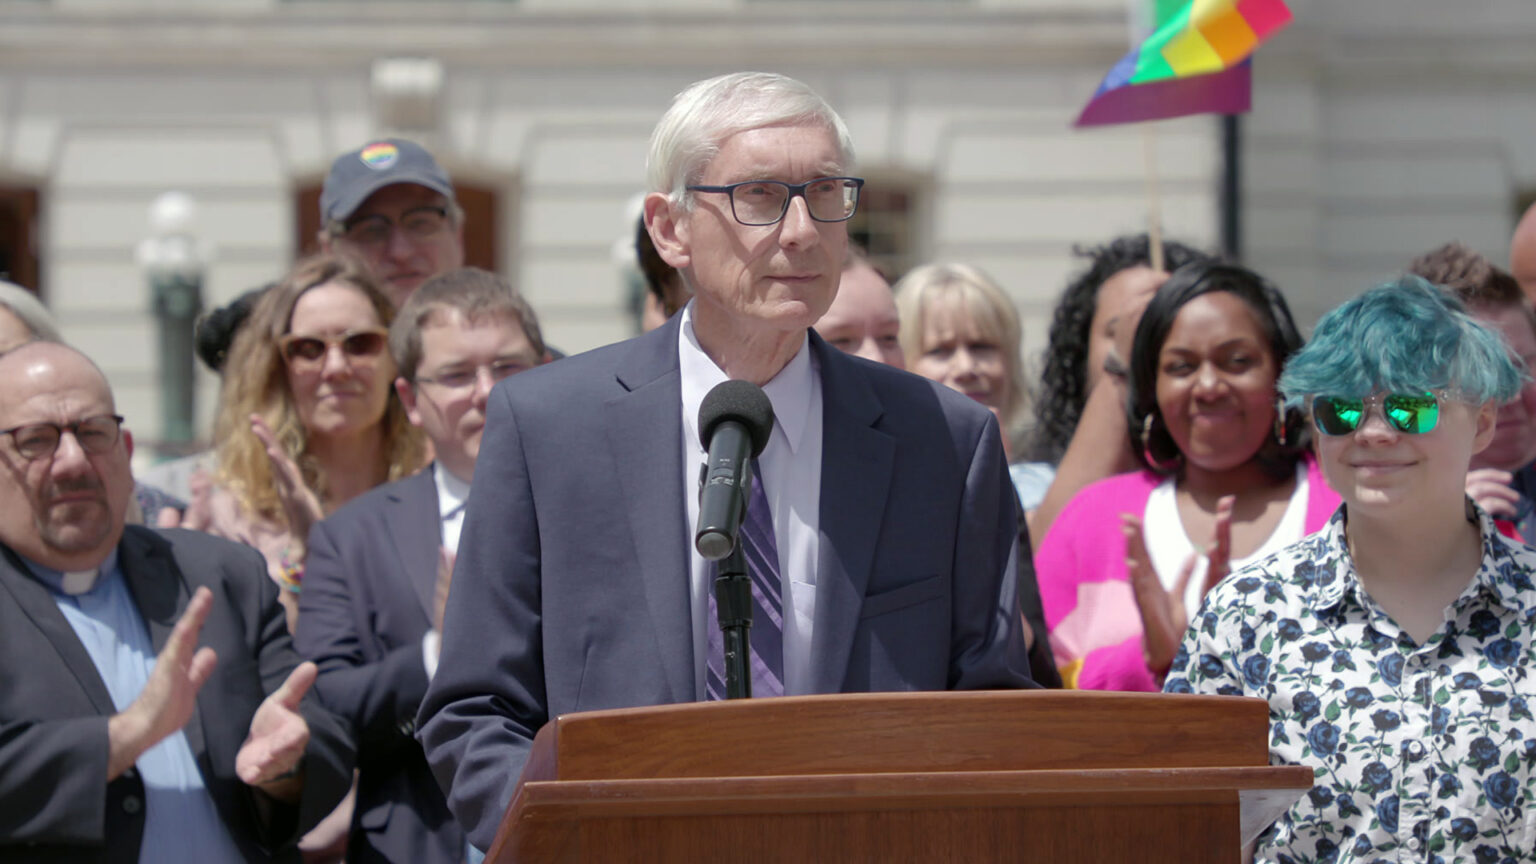 Tony Evers speaks into a microphone while standing behind a wood podium, with other people applauding while standing around and behind him, with an out-of-focus building in the background.